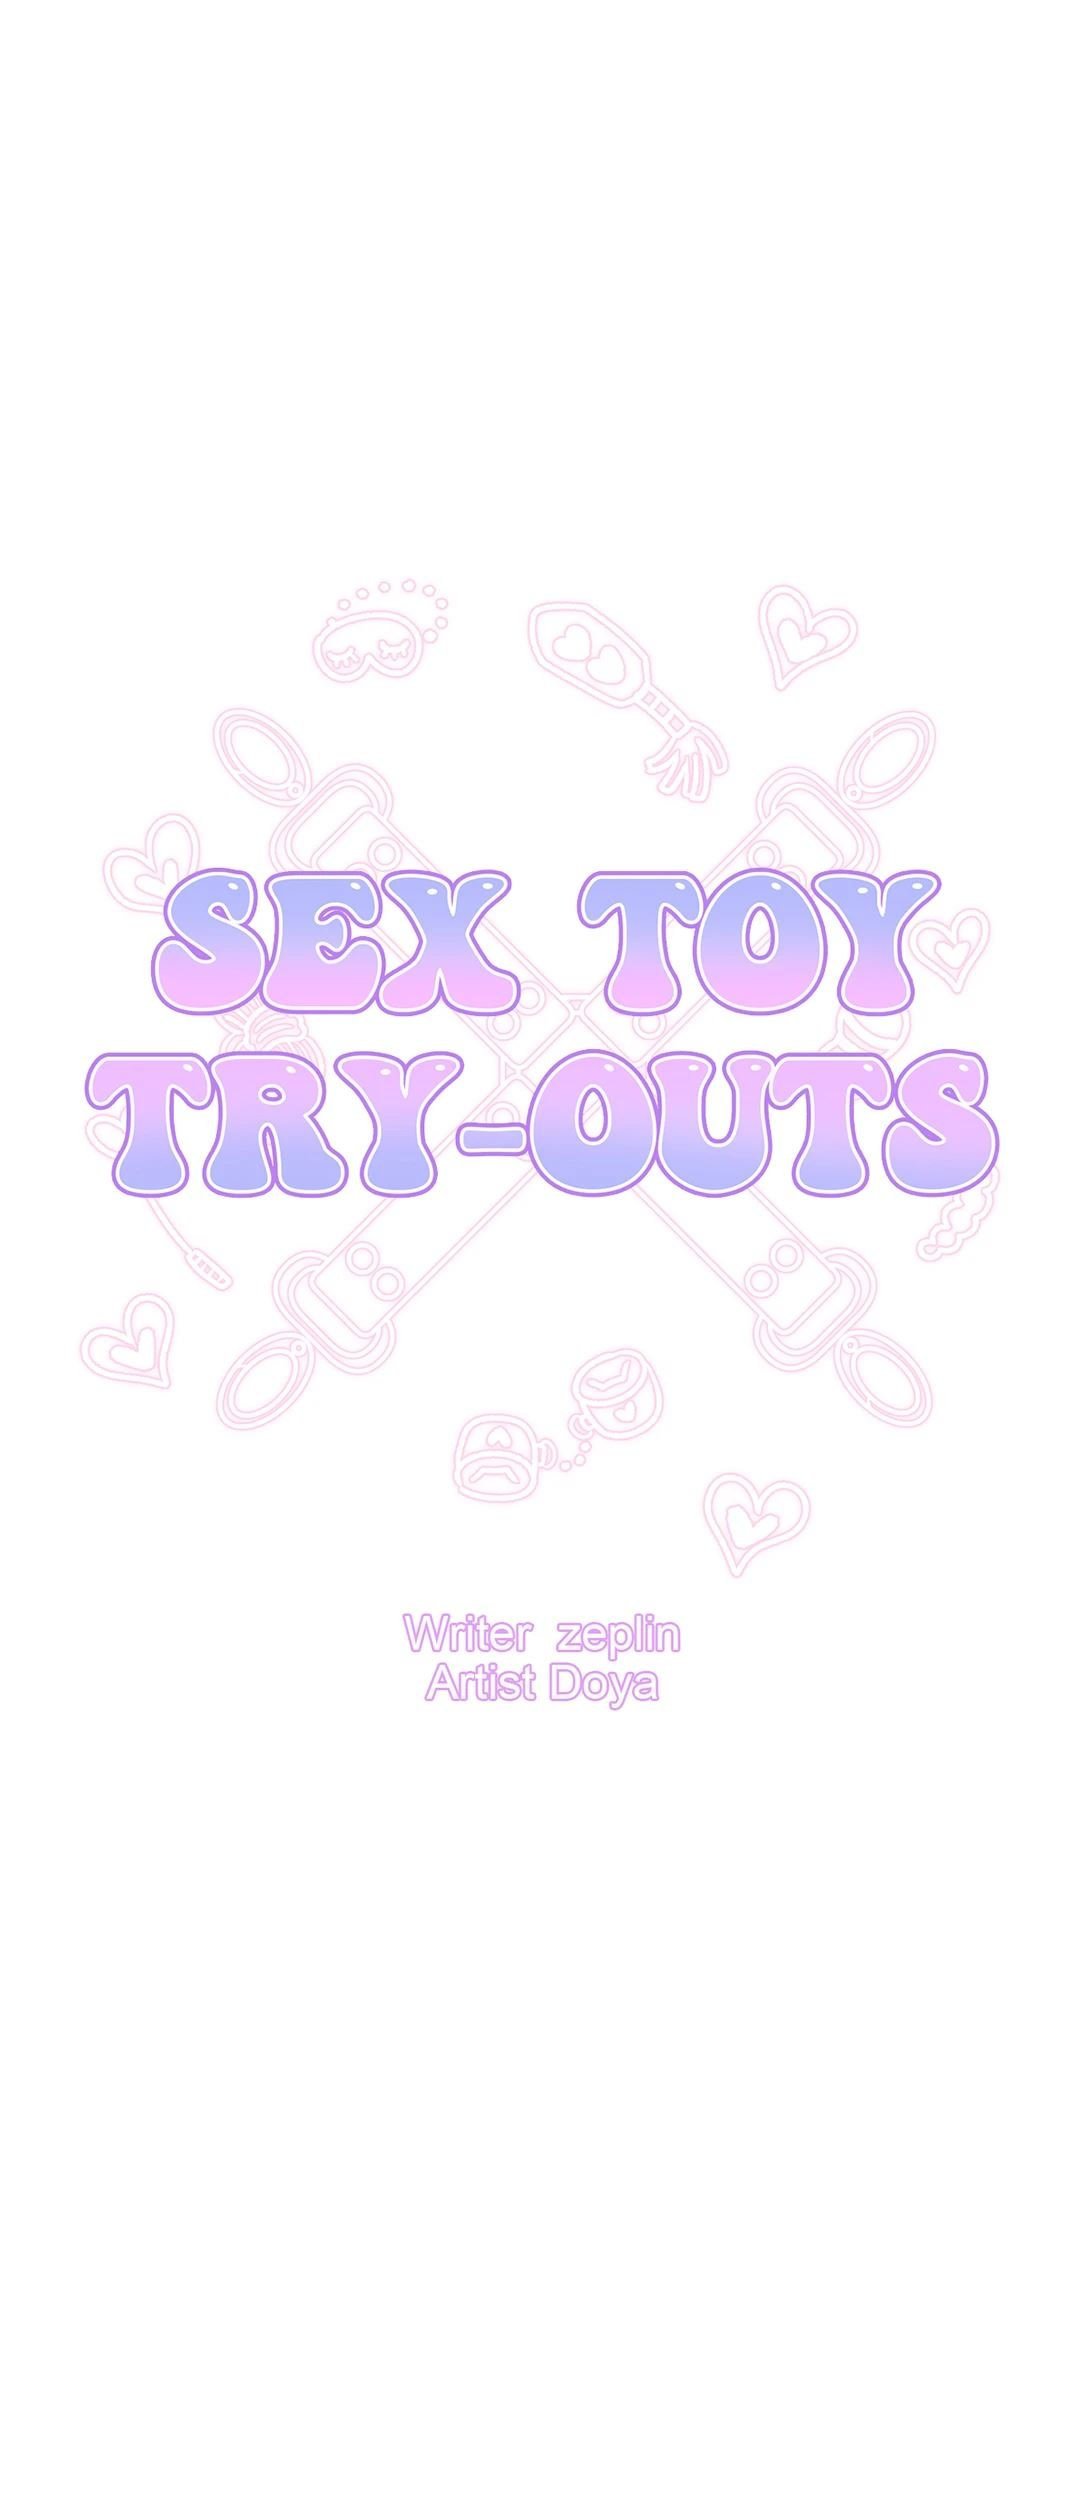 sex-toy-try-outs-chap-1-13